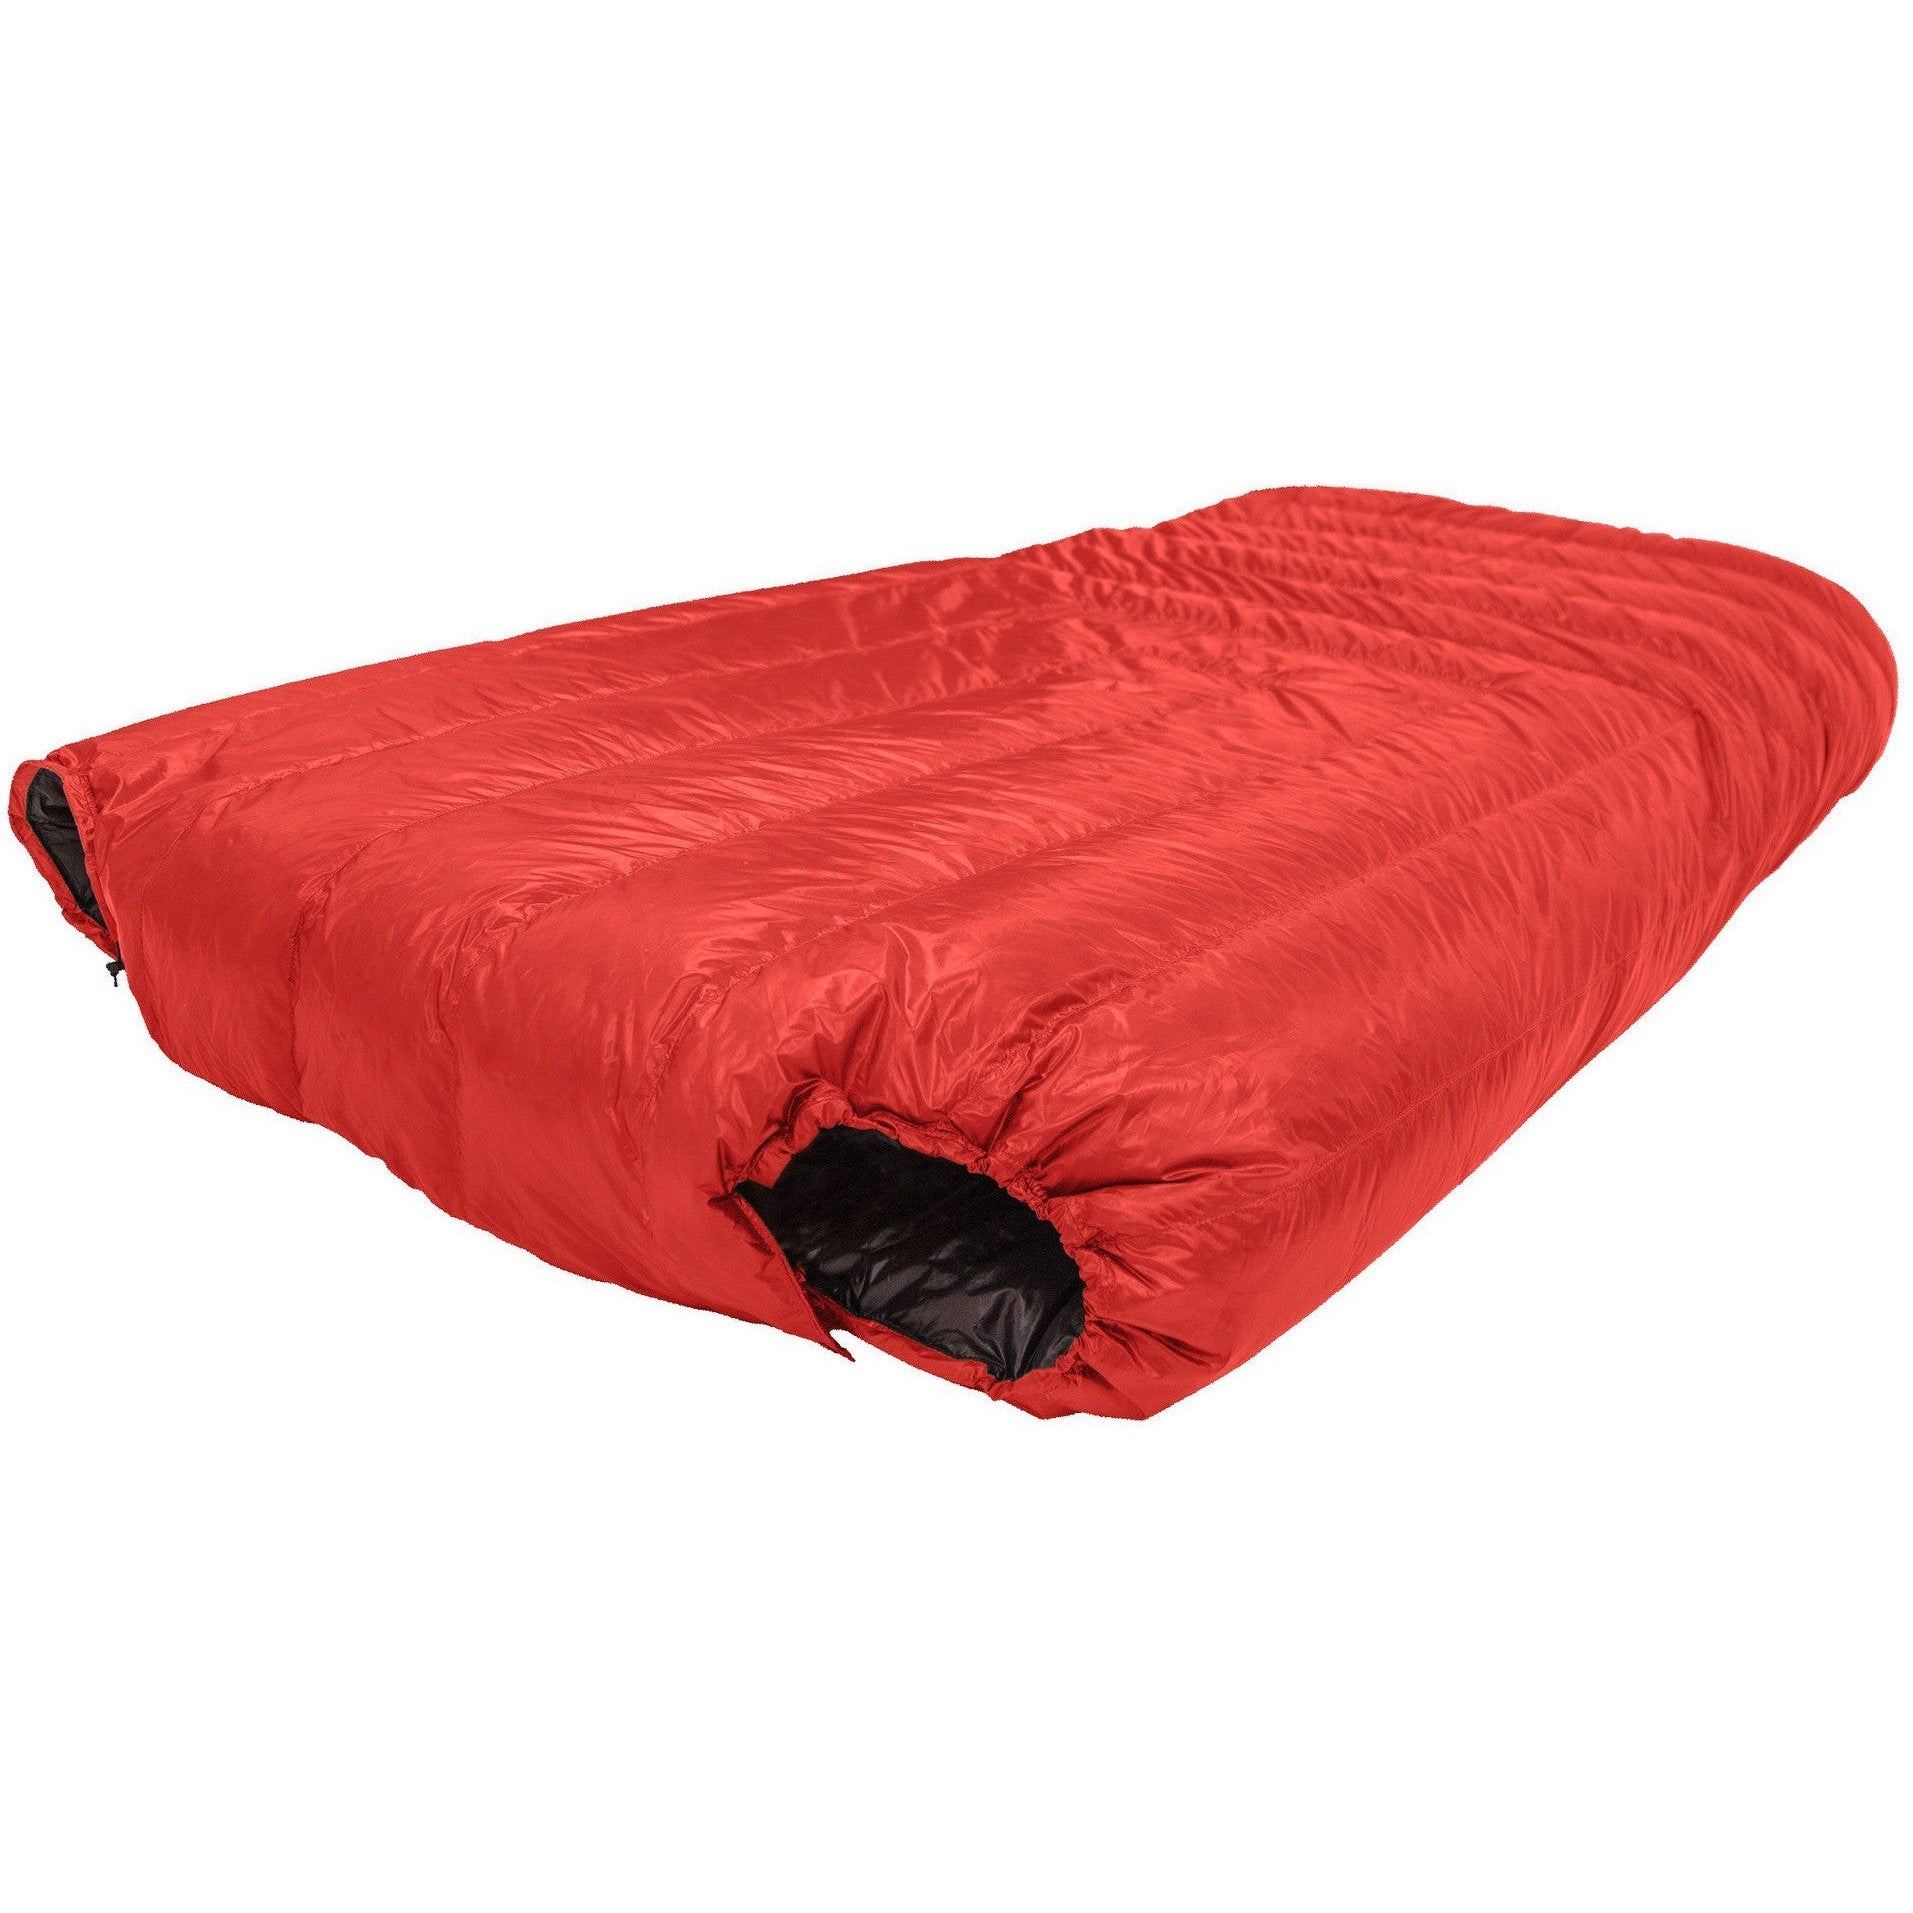 Accomplice 2-Person Sleeping Quilt